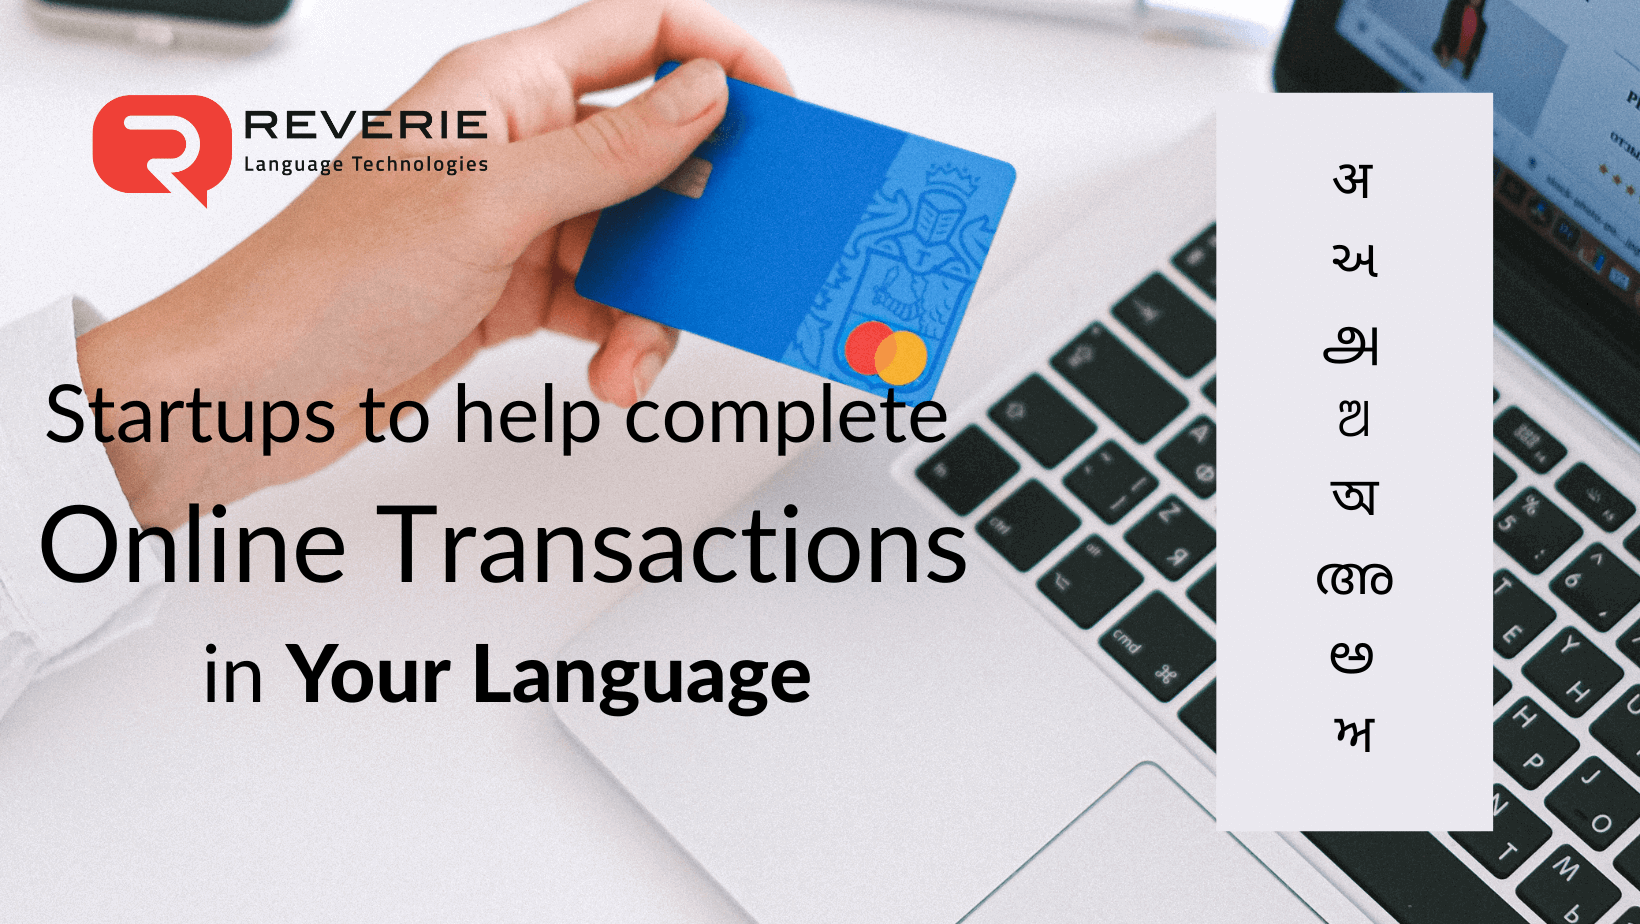 Startups to help complete Online Transactions in Your Language